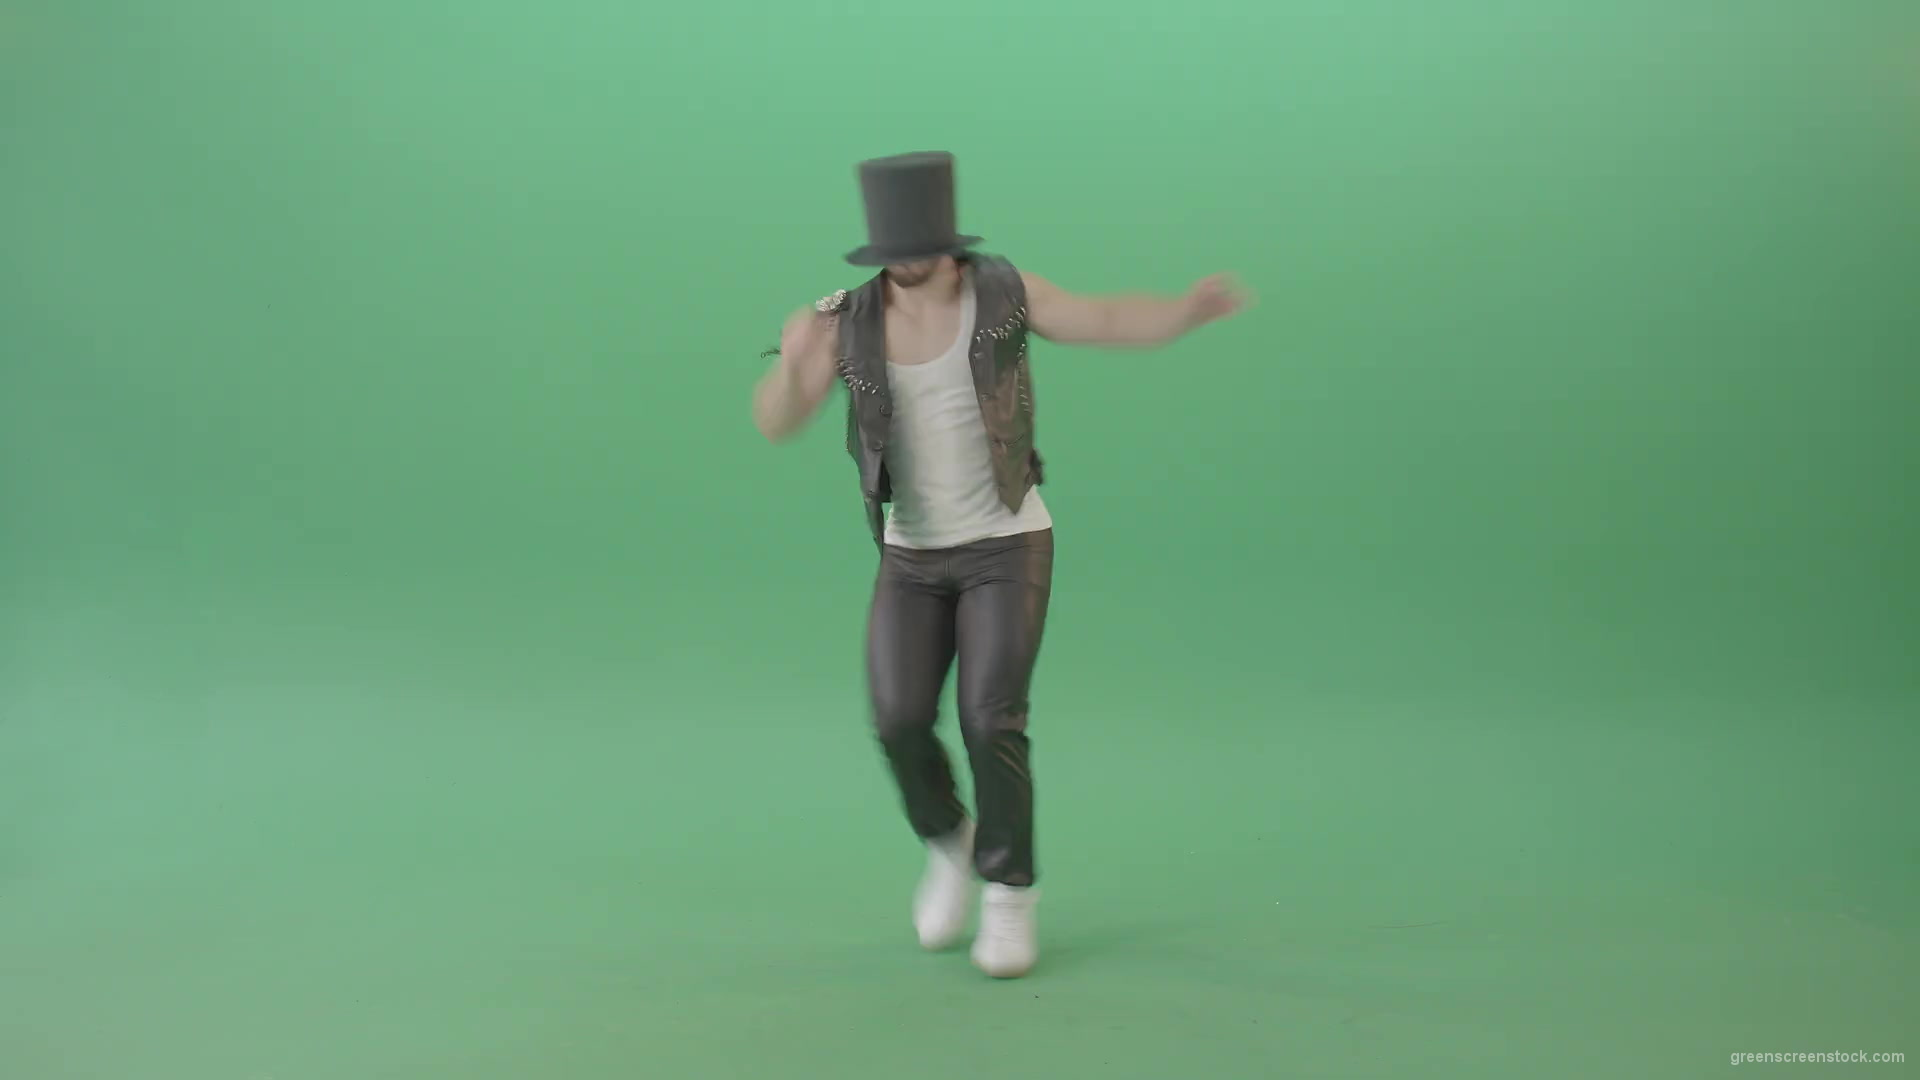 Man-in-black-Busines-Cylinder-Hat-dancing-and-jumping-in-Shuffle-dance-isolated-on-Green-Screen-4K-Video-Footage-1920_001 Green Screen Stock